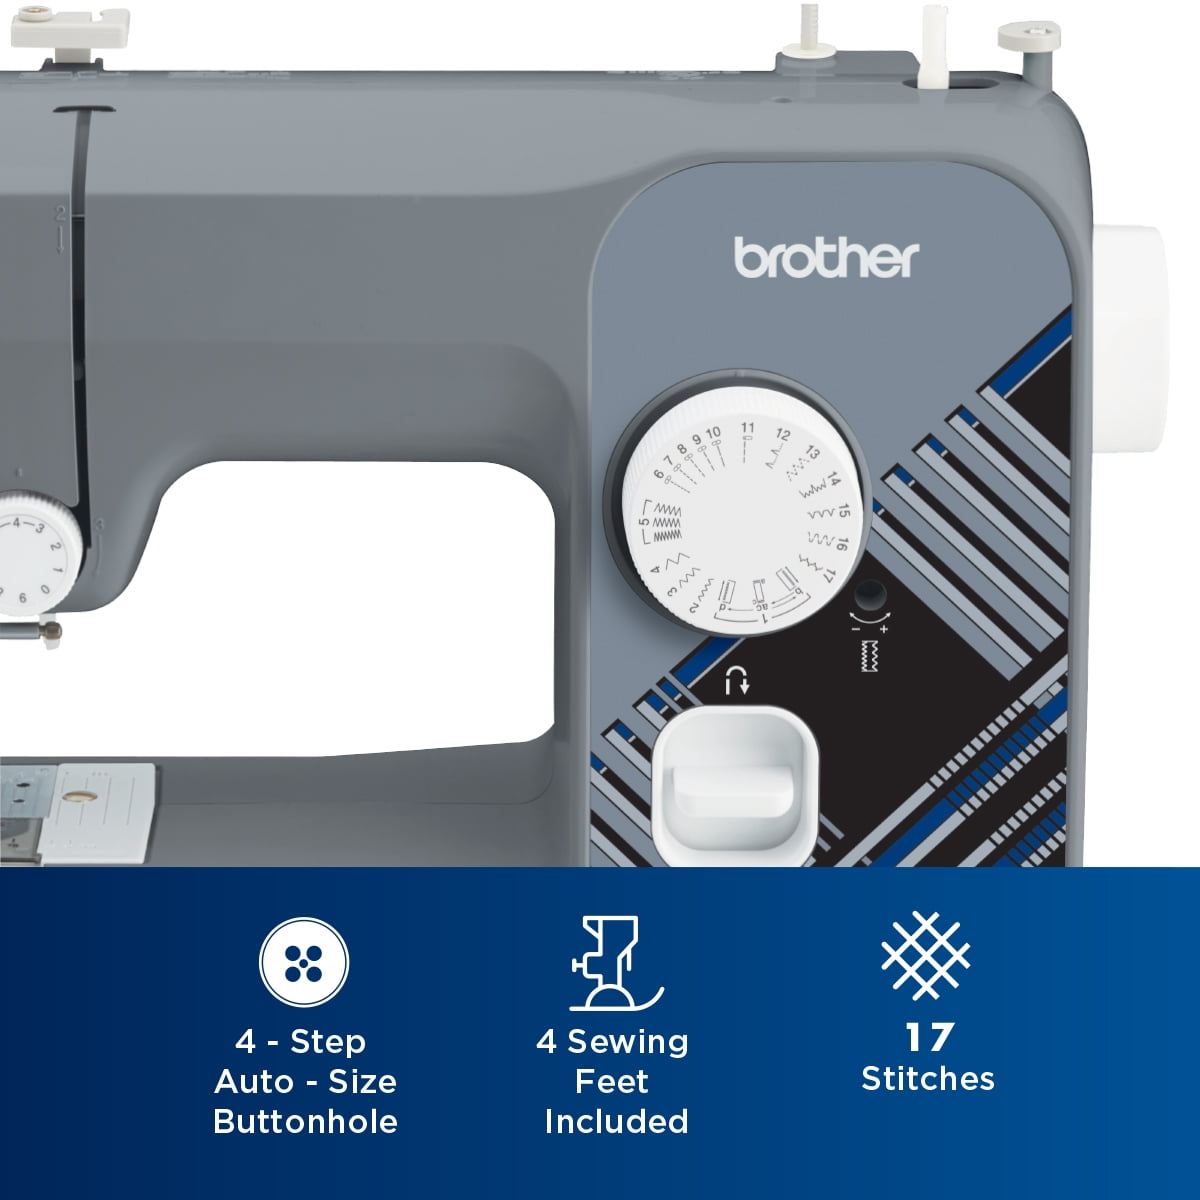 Cheapest Sewing Machine at Walmart Review, Brother LX 3817 Unboxing